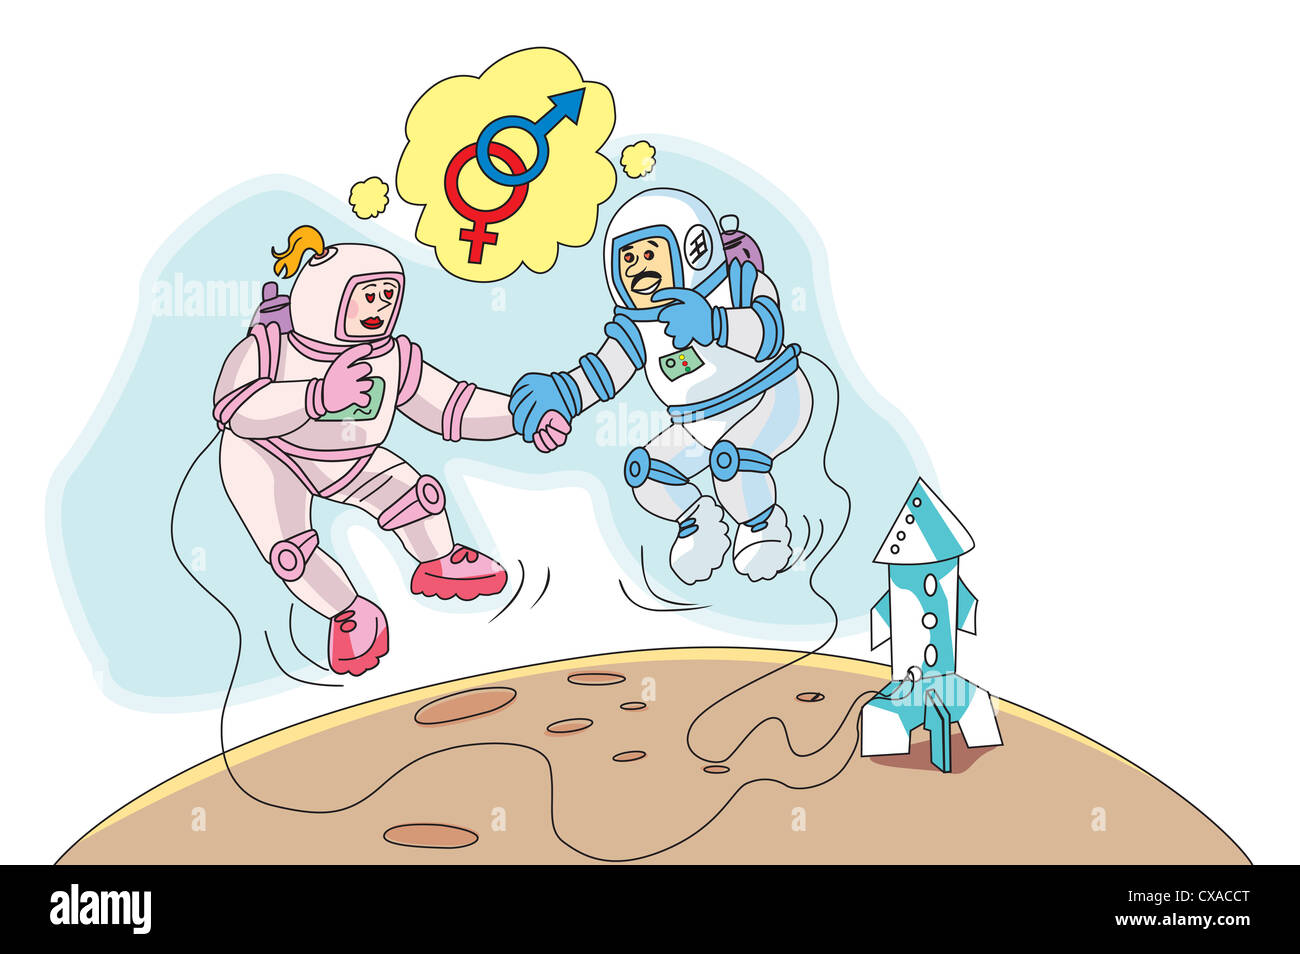 Astronauts in Love, Space Walk, Rocket to the Moon, vector illustration Stock Photo